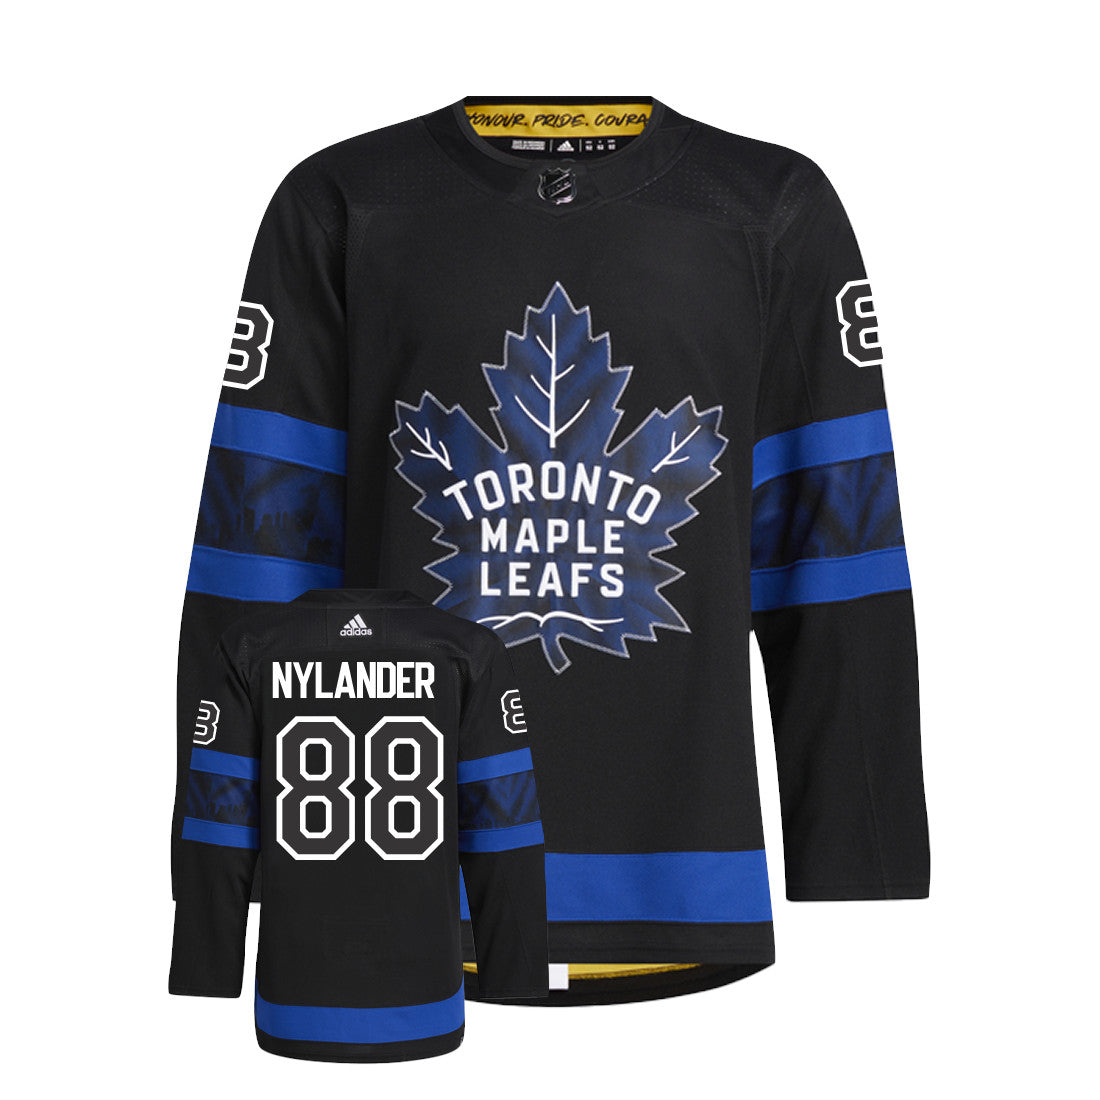 William Nylander Toronto Maple Leafs Adidas Primegreen Authentic Third Alterenate NHL Hockey Jersey - Front/Back View